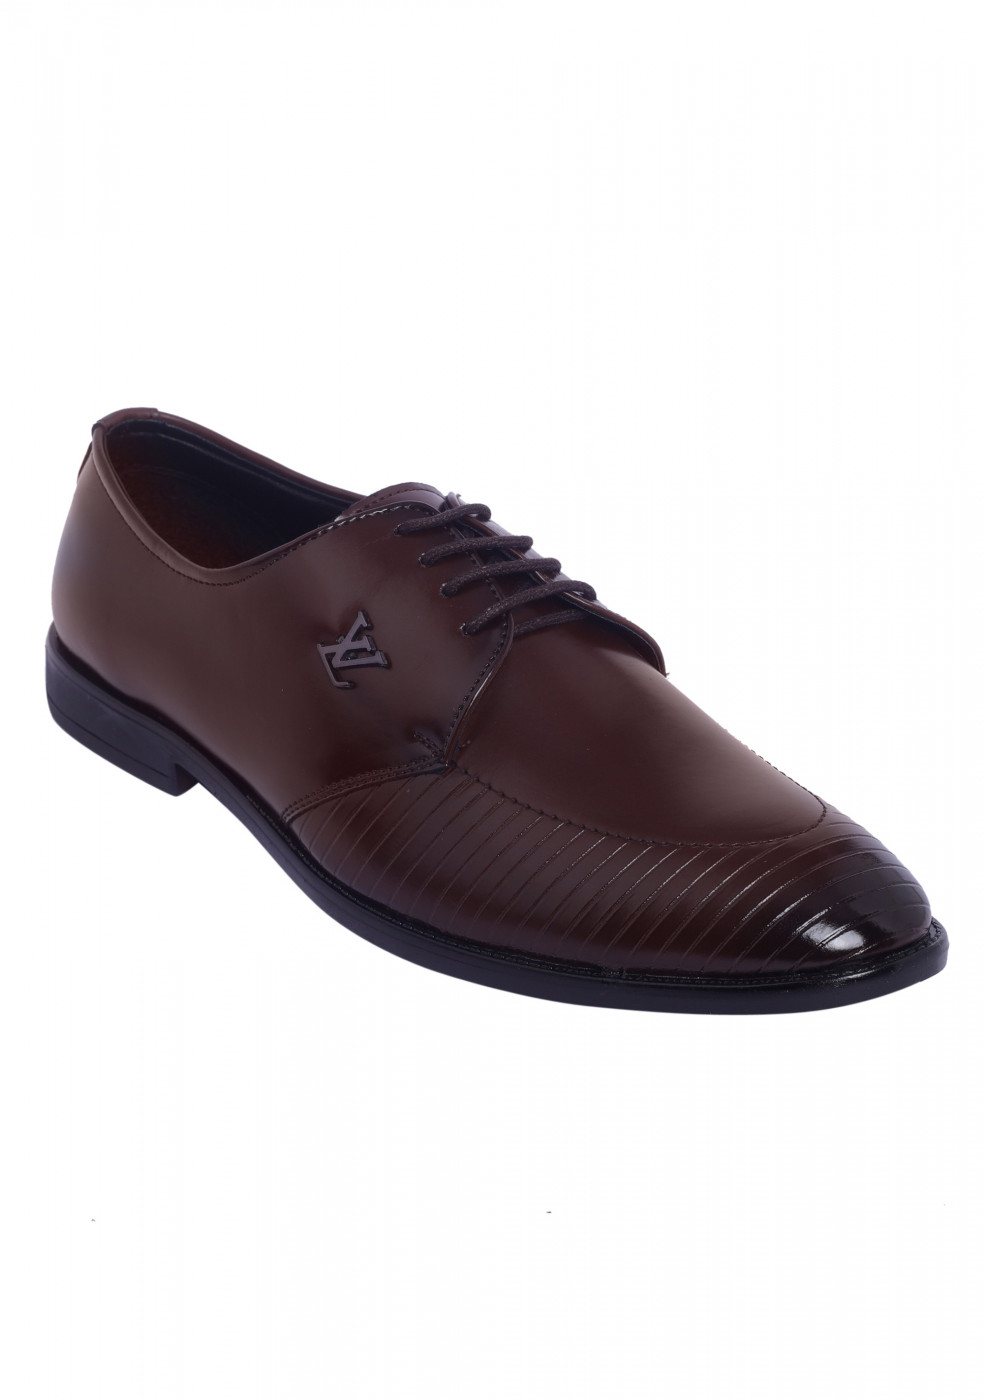 XSTOM Formal Laceup Brown Shoes For Men